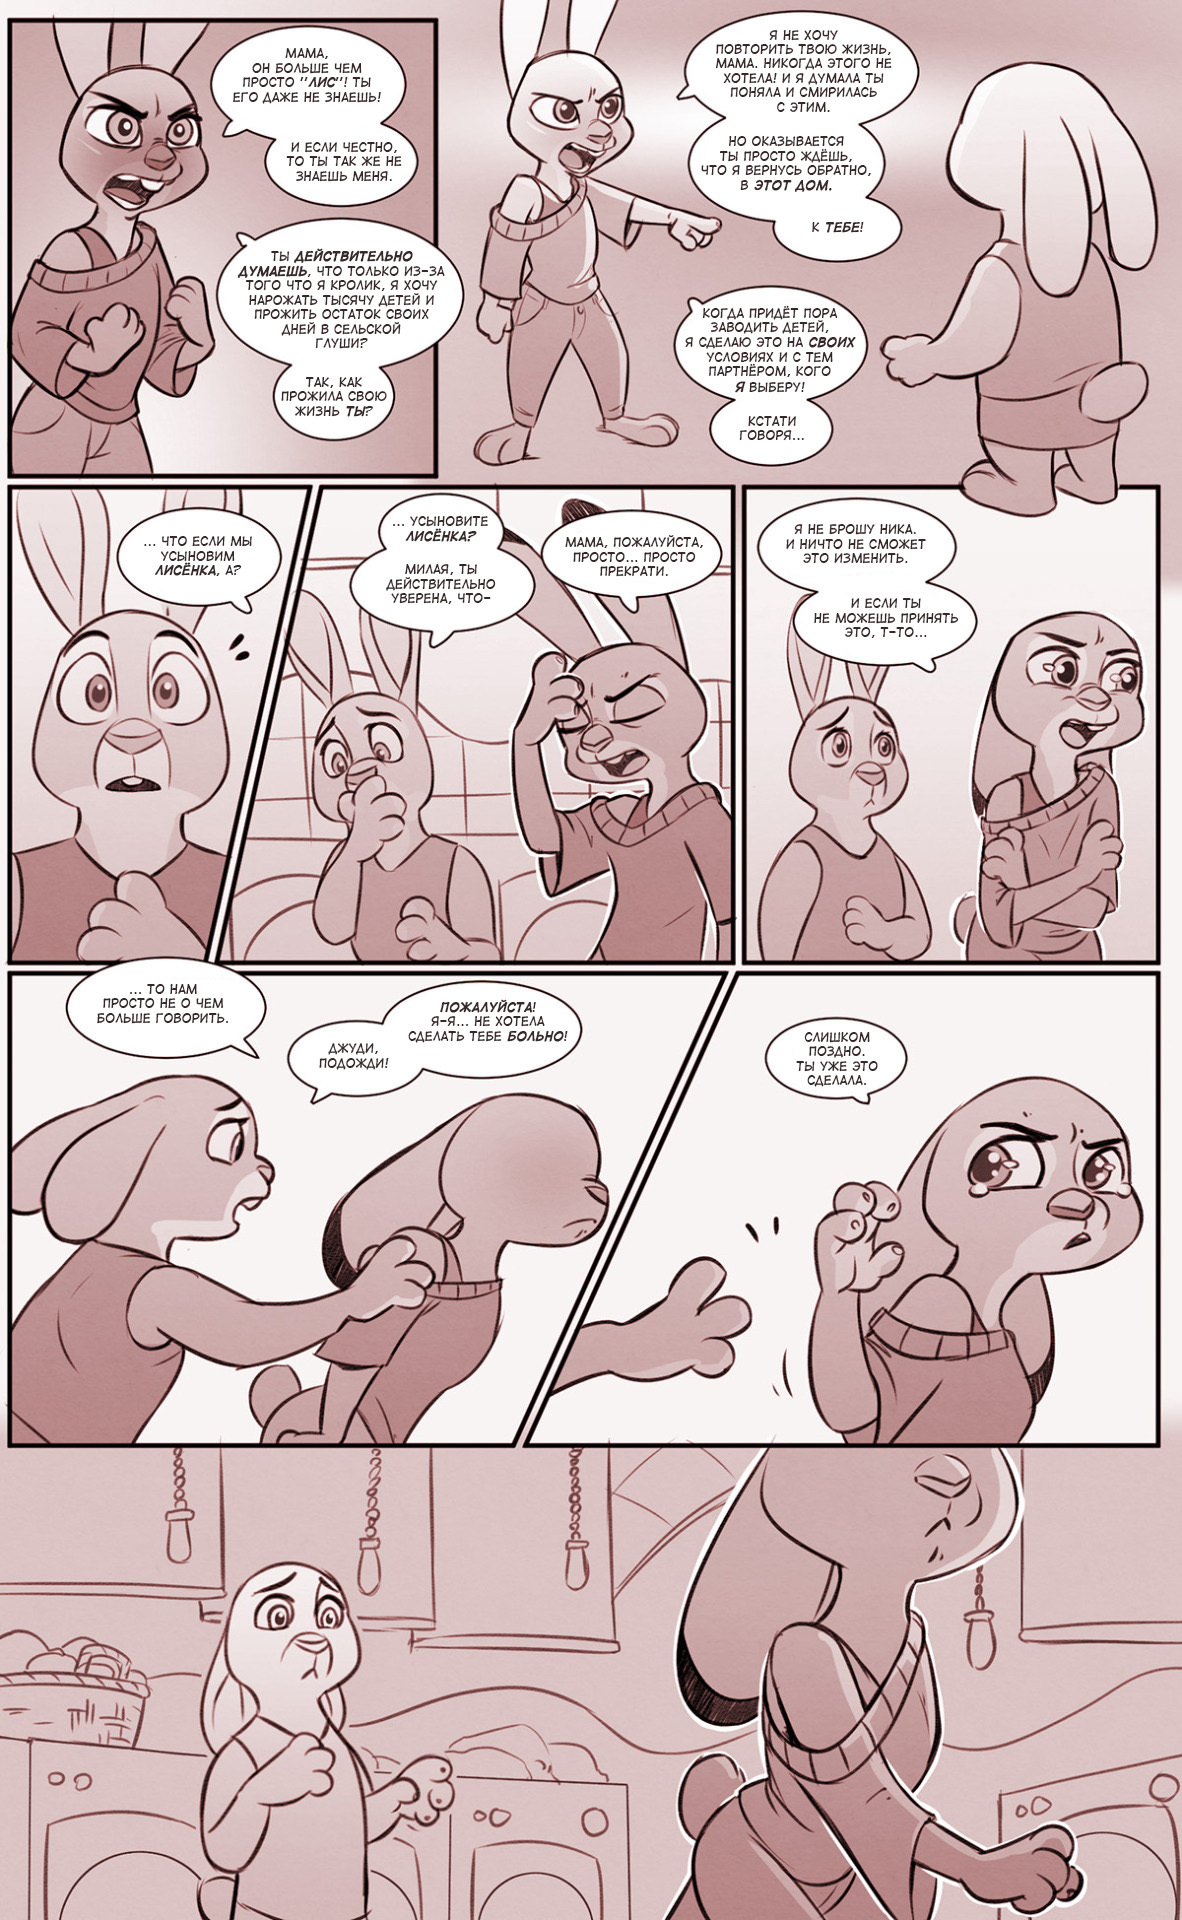 Flooded Minks - Chapter 3 (Part 2) - Zootopia, Zootopia, Nick and Judy, , , Comics, Mead, Longpost